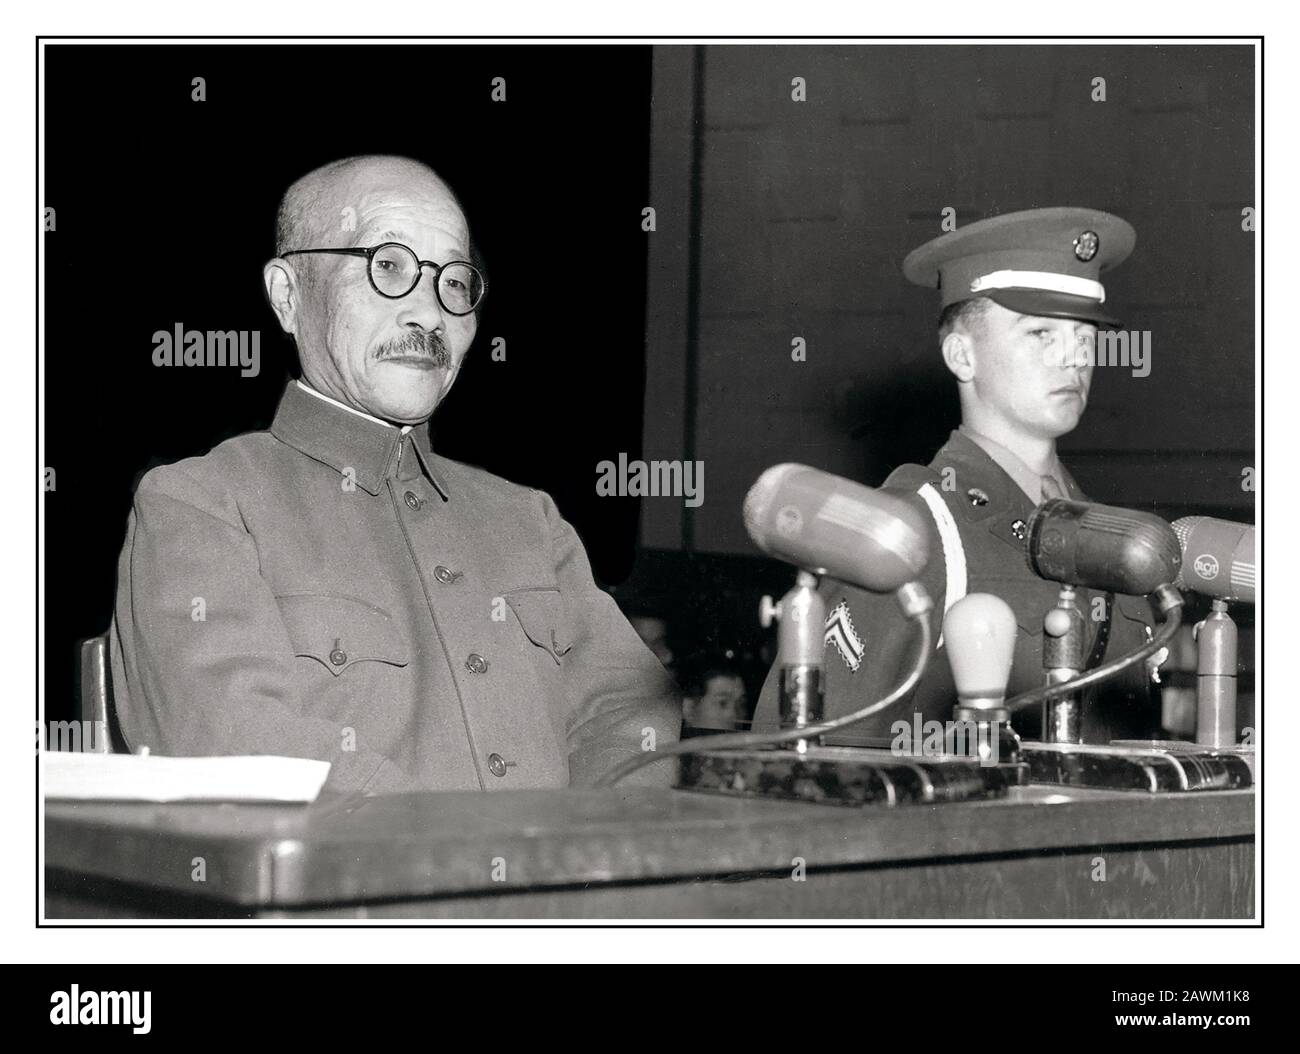 GENERAL HIDEKI TOJO COURT TRIAL JAPAN WAR CRIMES TOJO TRIALS Vintage post WW2 image of General Hideki Tojo taking the stand for the first time during the World War II Tokyo Trials in Japan on Dec. 26, 1947. Subsequently Tojo was found guilty of unspeakably brutal & heinous war crimes, committed directly under his command and he was executed in 1948 Stock Photo